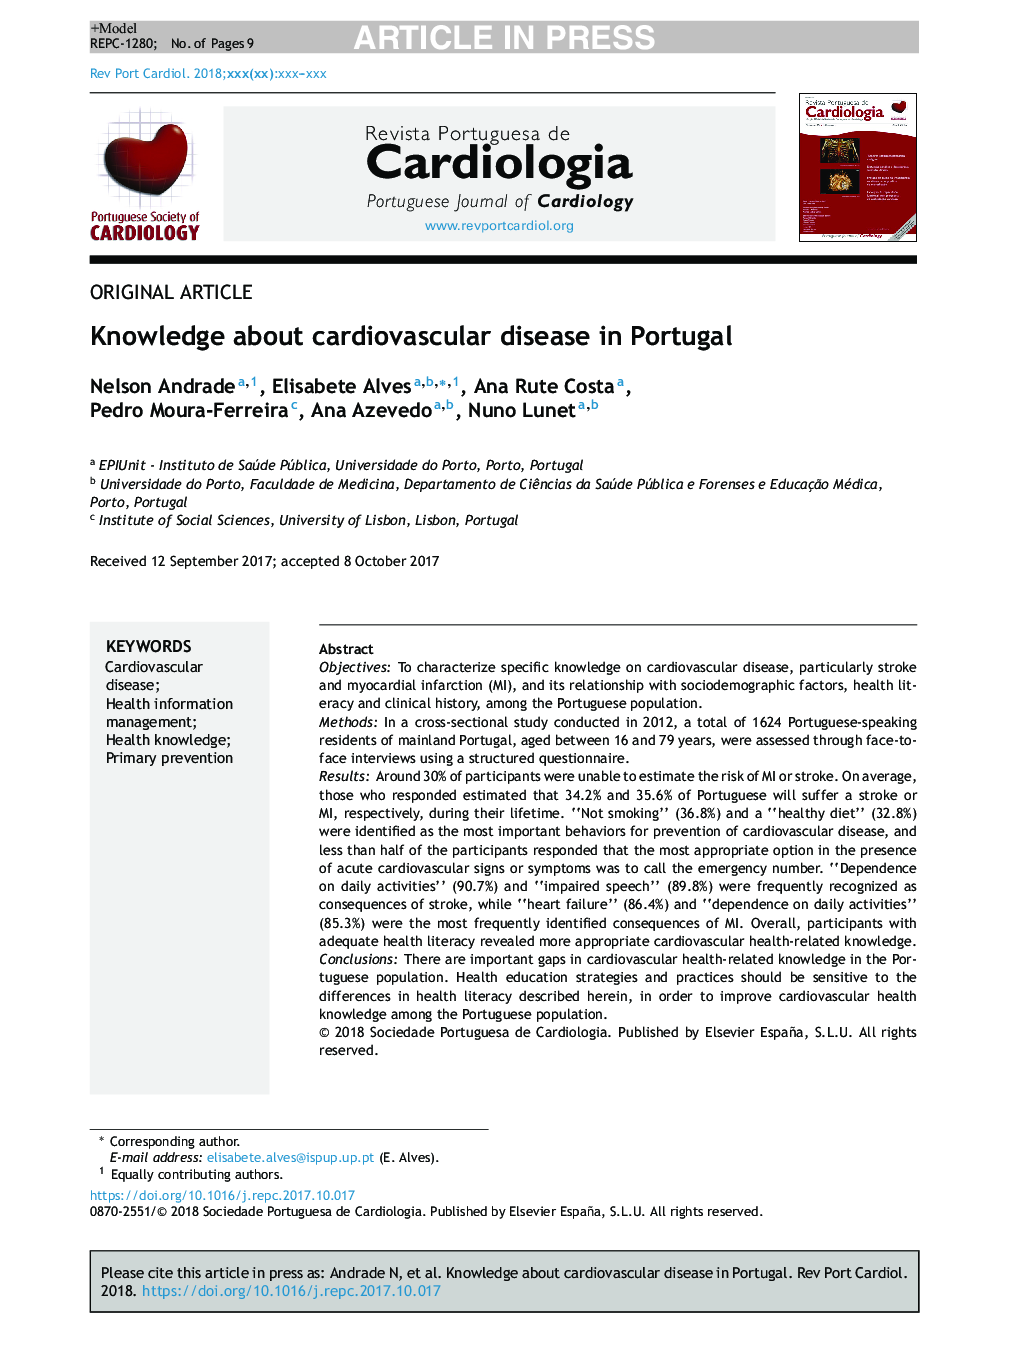 Knowledge about cardiovascular disease in Portugal